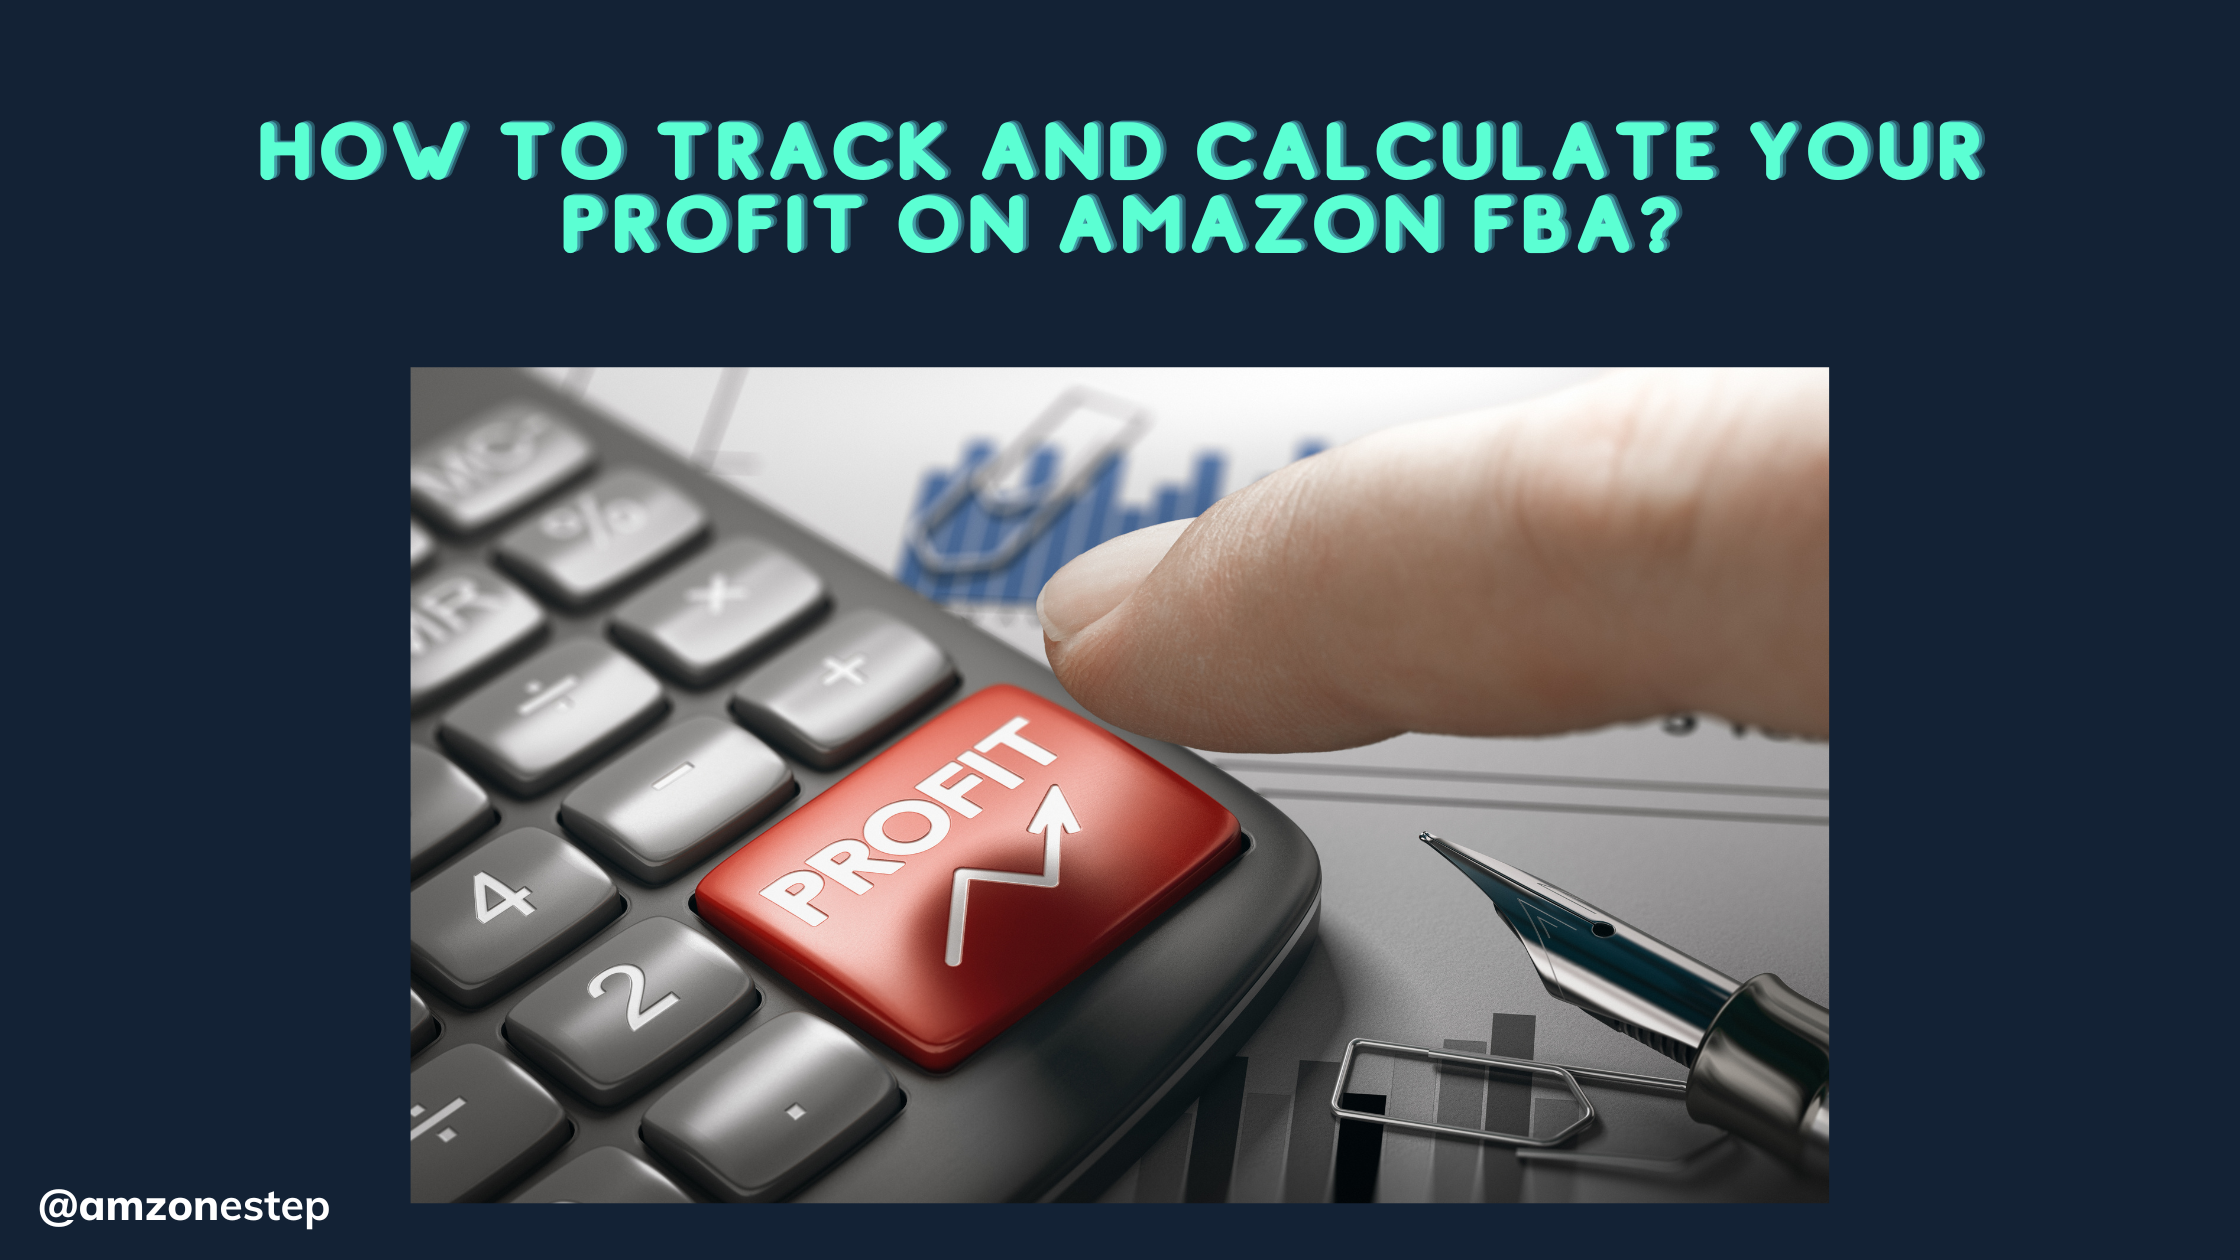 How to Track and Calculate Your Profit on Amazon FBA?